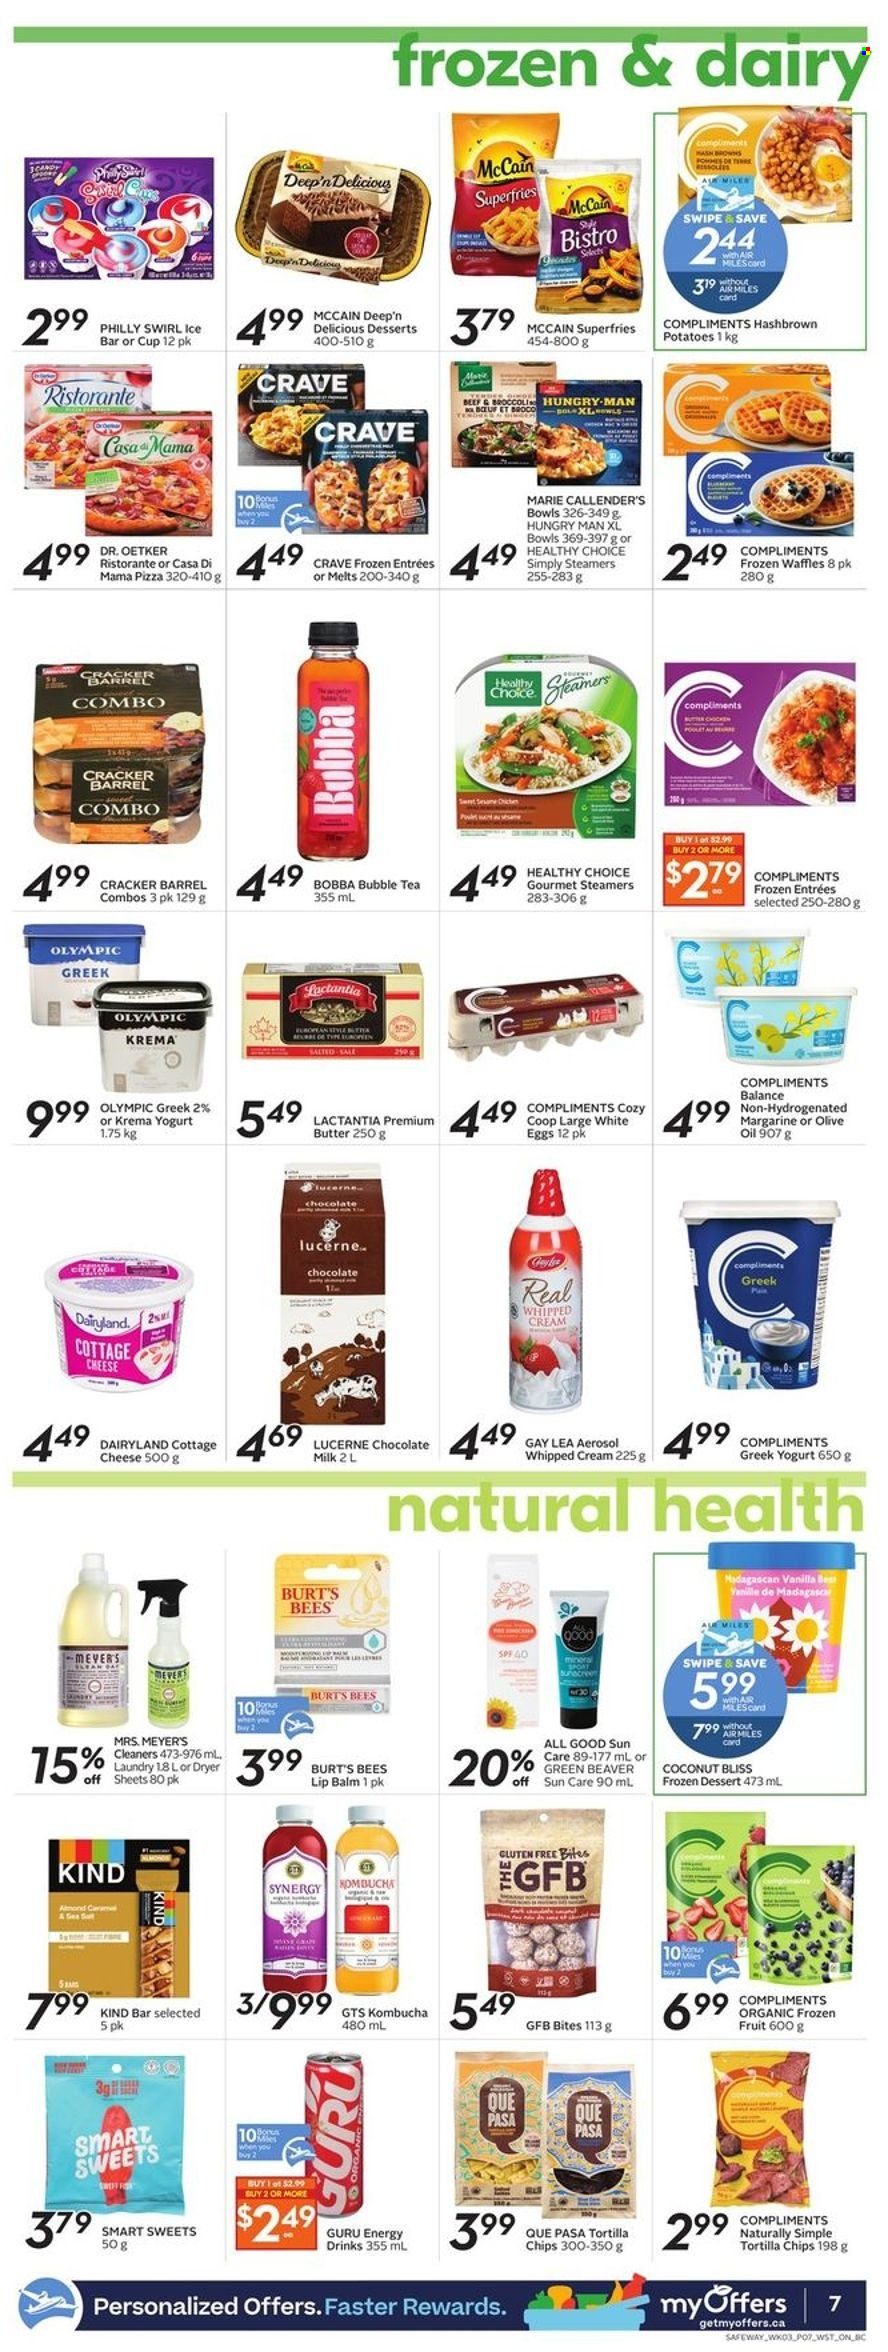 thumbnail - Safeway Flyer - May 19, 2022 - May 25, 2022 - Sales products - waffles, potatoes, pizza, Healthy Choice, Marie Callender's, cottage cheese, Dr. Oetker, greek yoghurt, yoghurt, milk, eggs, butter, margarine, whipped cream, organic frozen fruit, McCain, potato fries, milk chocolate, chocolate, crackers, tortilla chips, olive oil, oil, energy drink, kombucha, tea, bubble tea, L'Or, lip balm. Page 8.